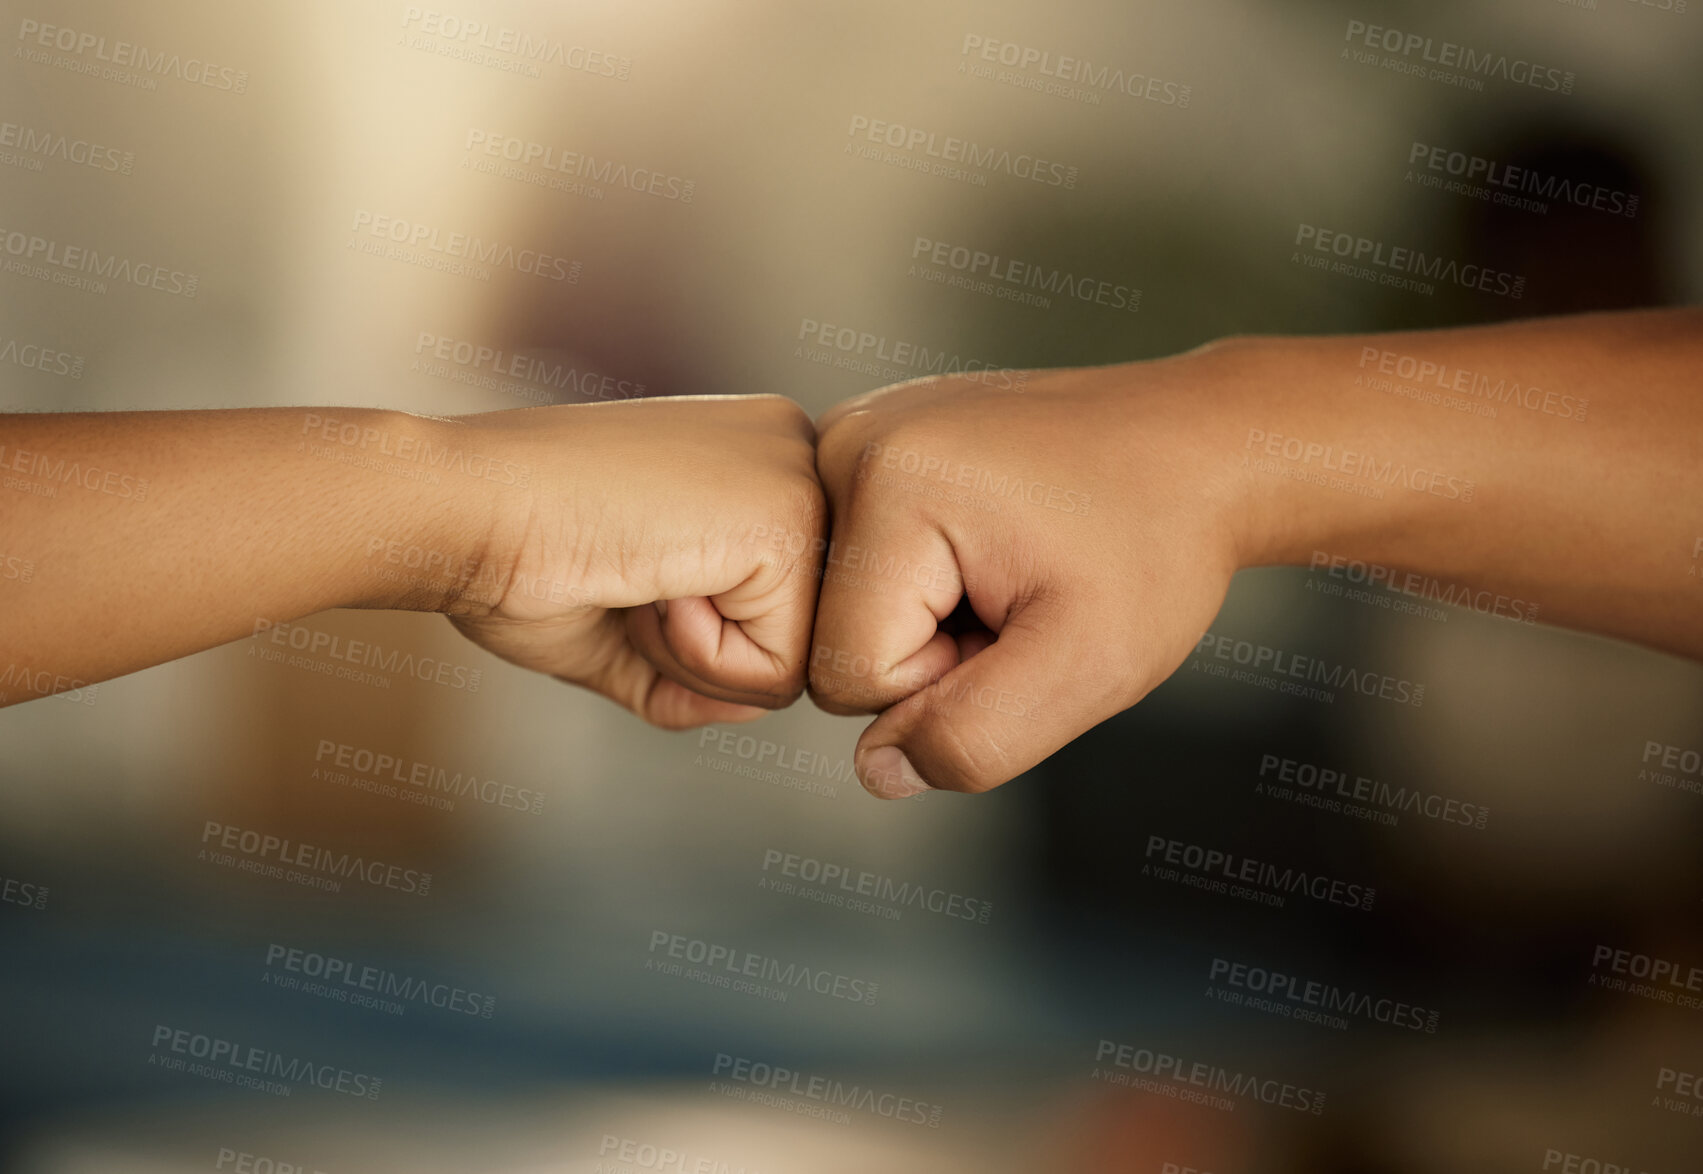 Buy stock photo Power, teamwork and solidarity fist bump gesture of people showing support, success or achieving goal. Celebrating, winning hands doing greeting as motivation, unity or team effort emoji